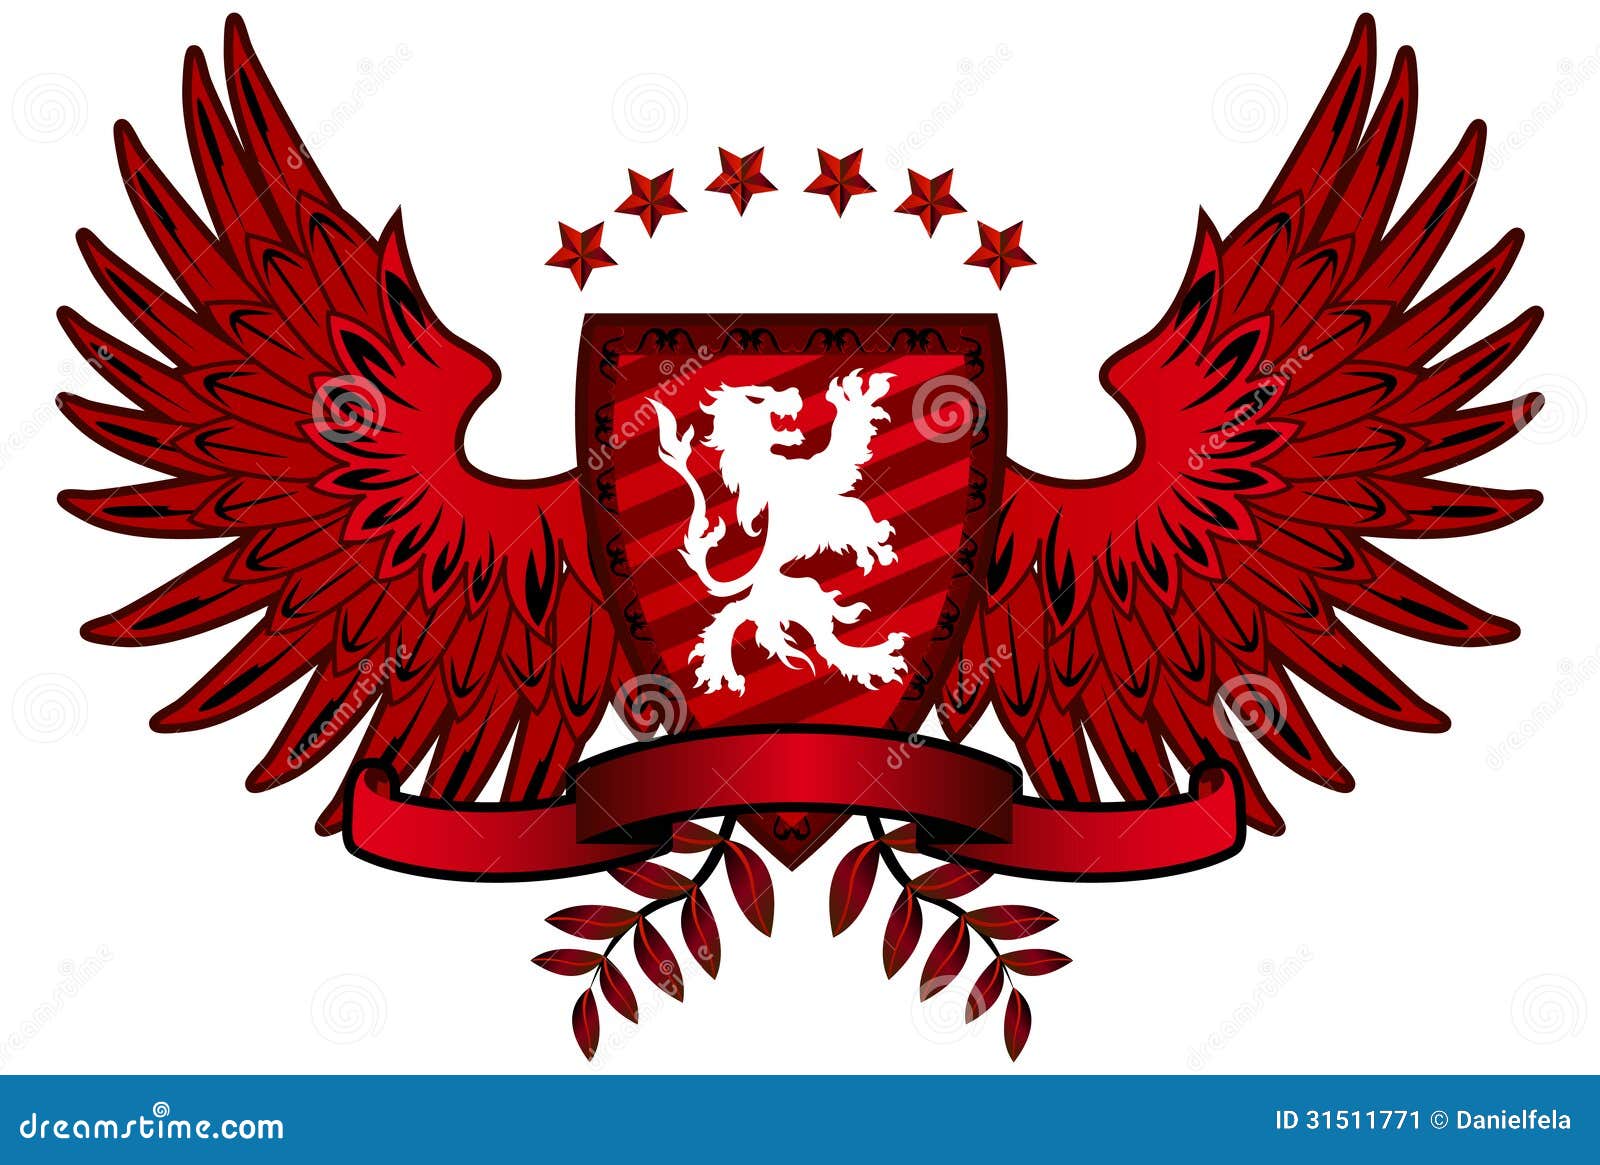 Red Lion Shield stock vector. Illustration of christianity - 31511771